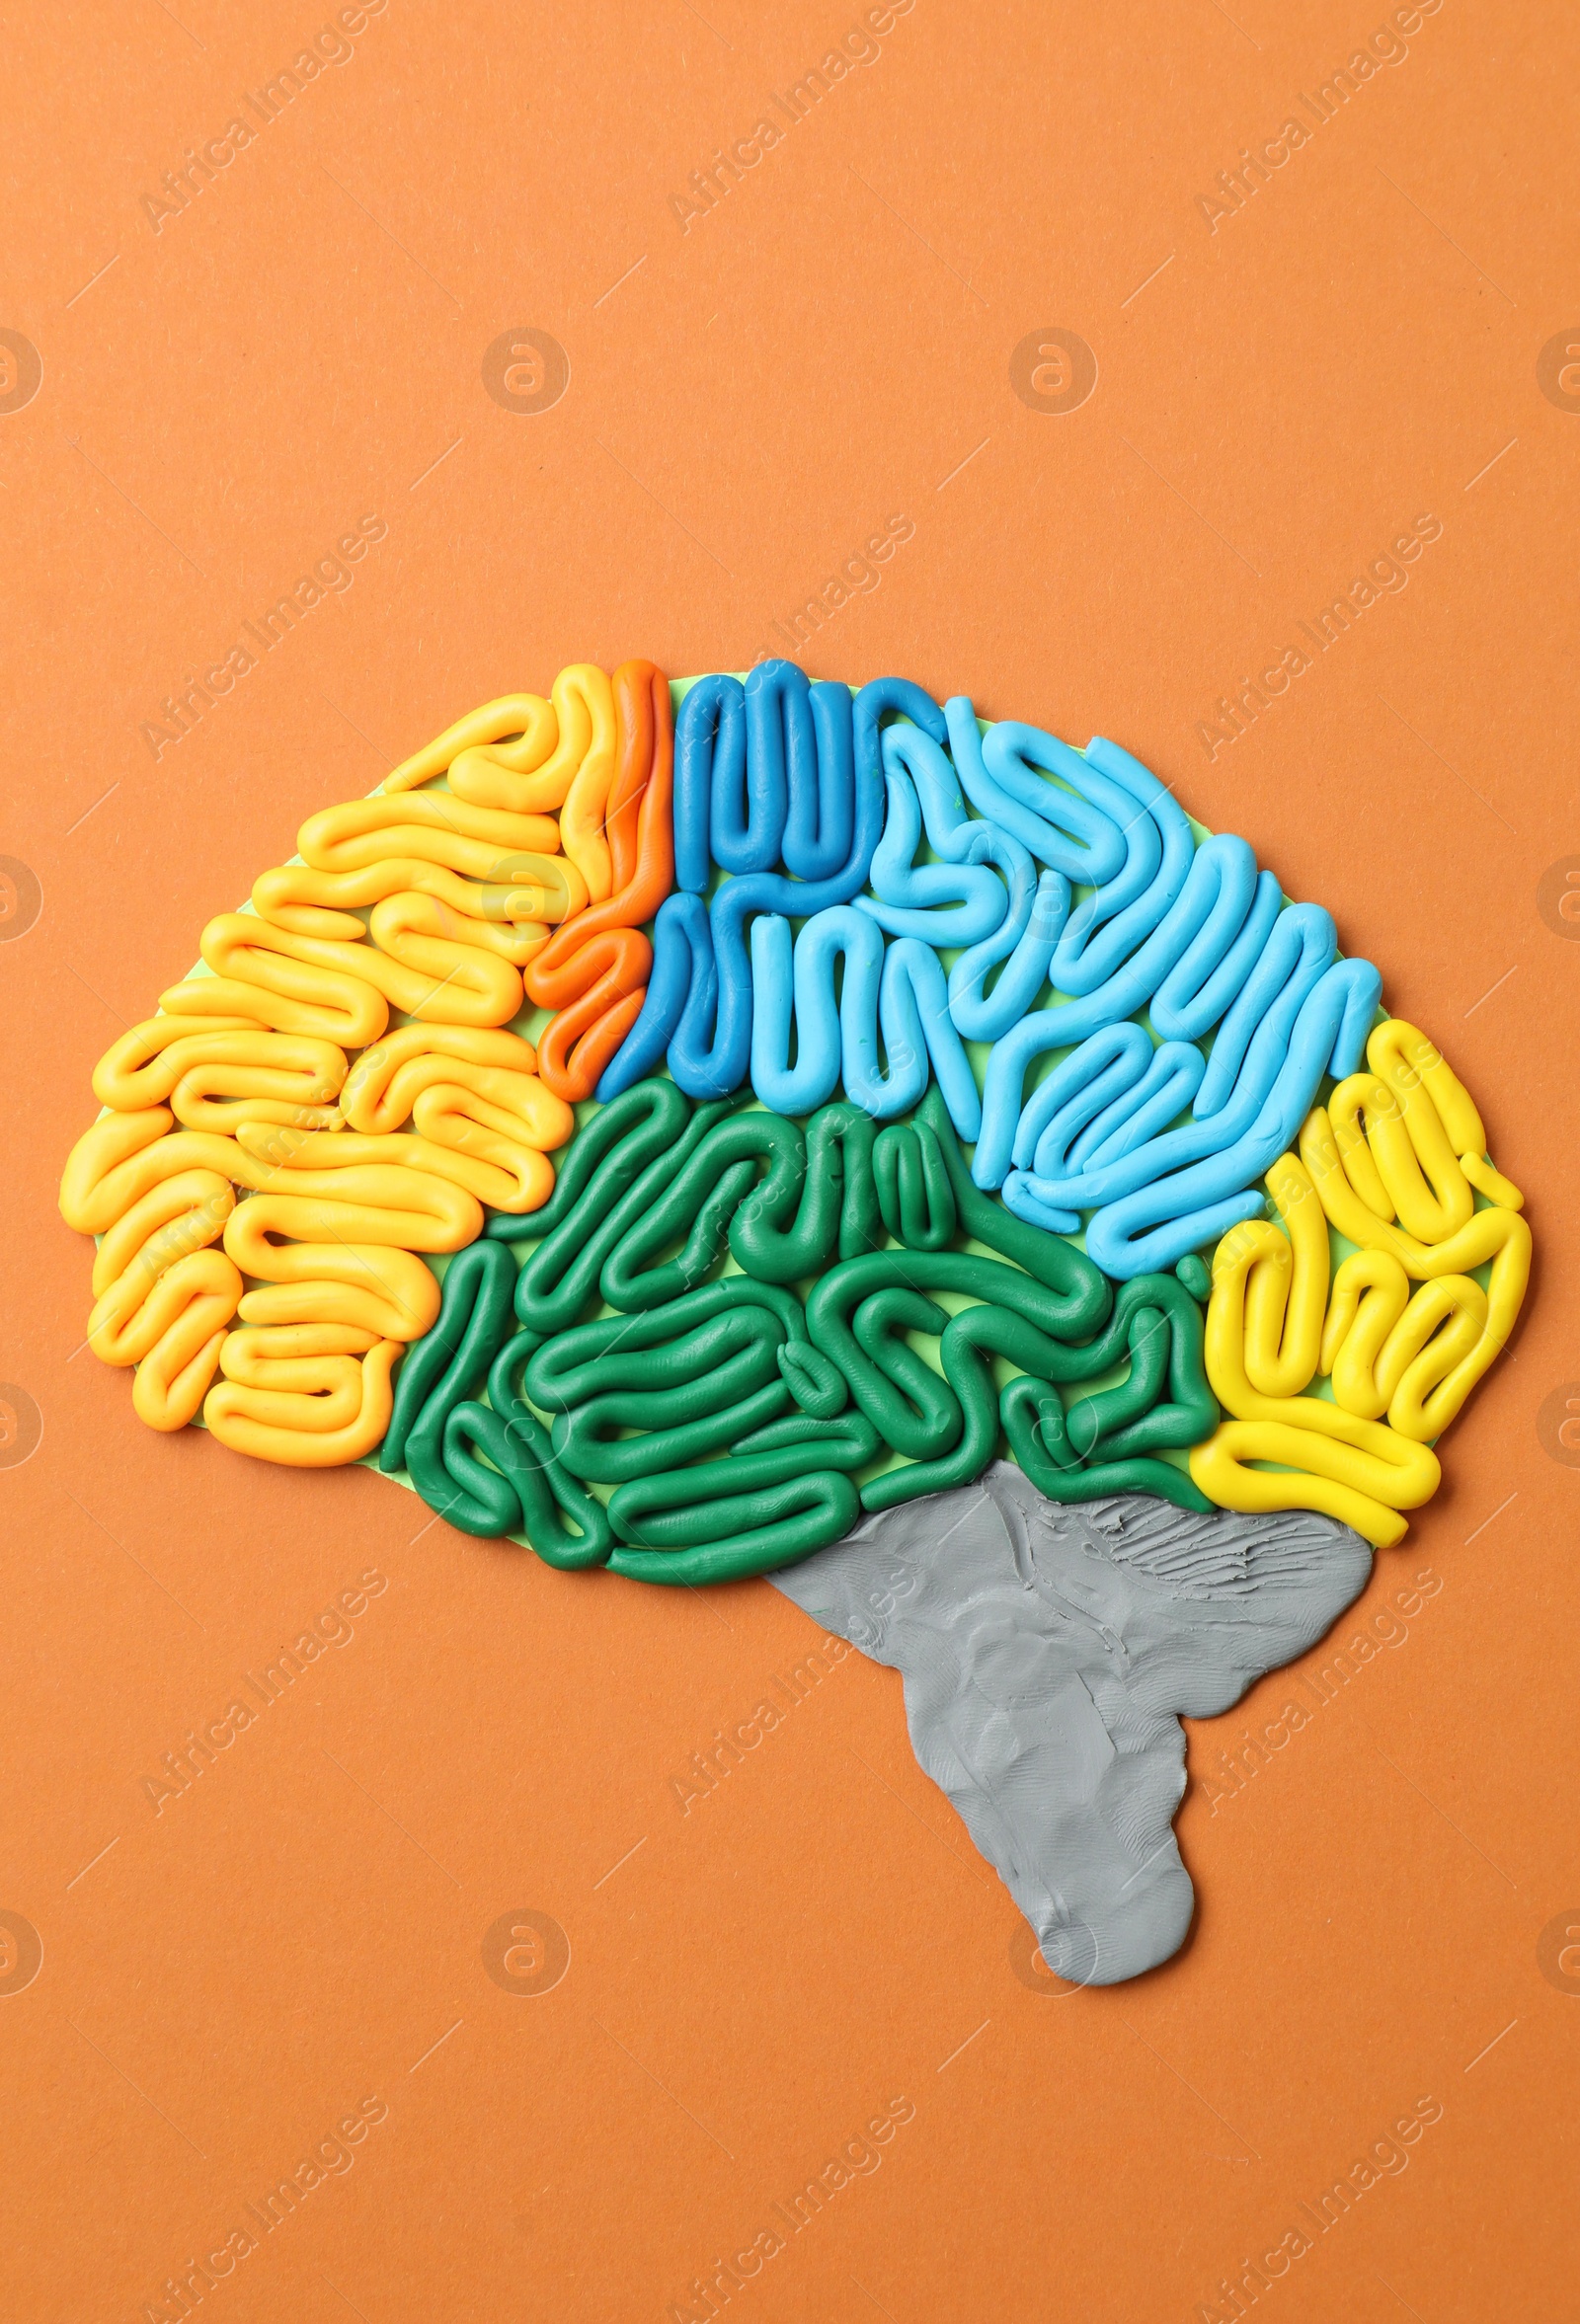 Photo of Amnesia problem. Brain with sections made of plasticine on orange background, top view